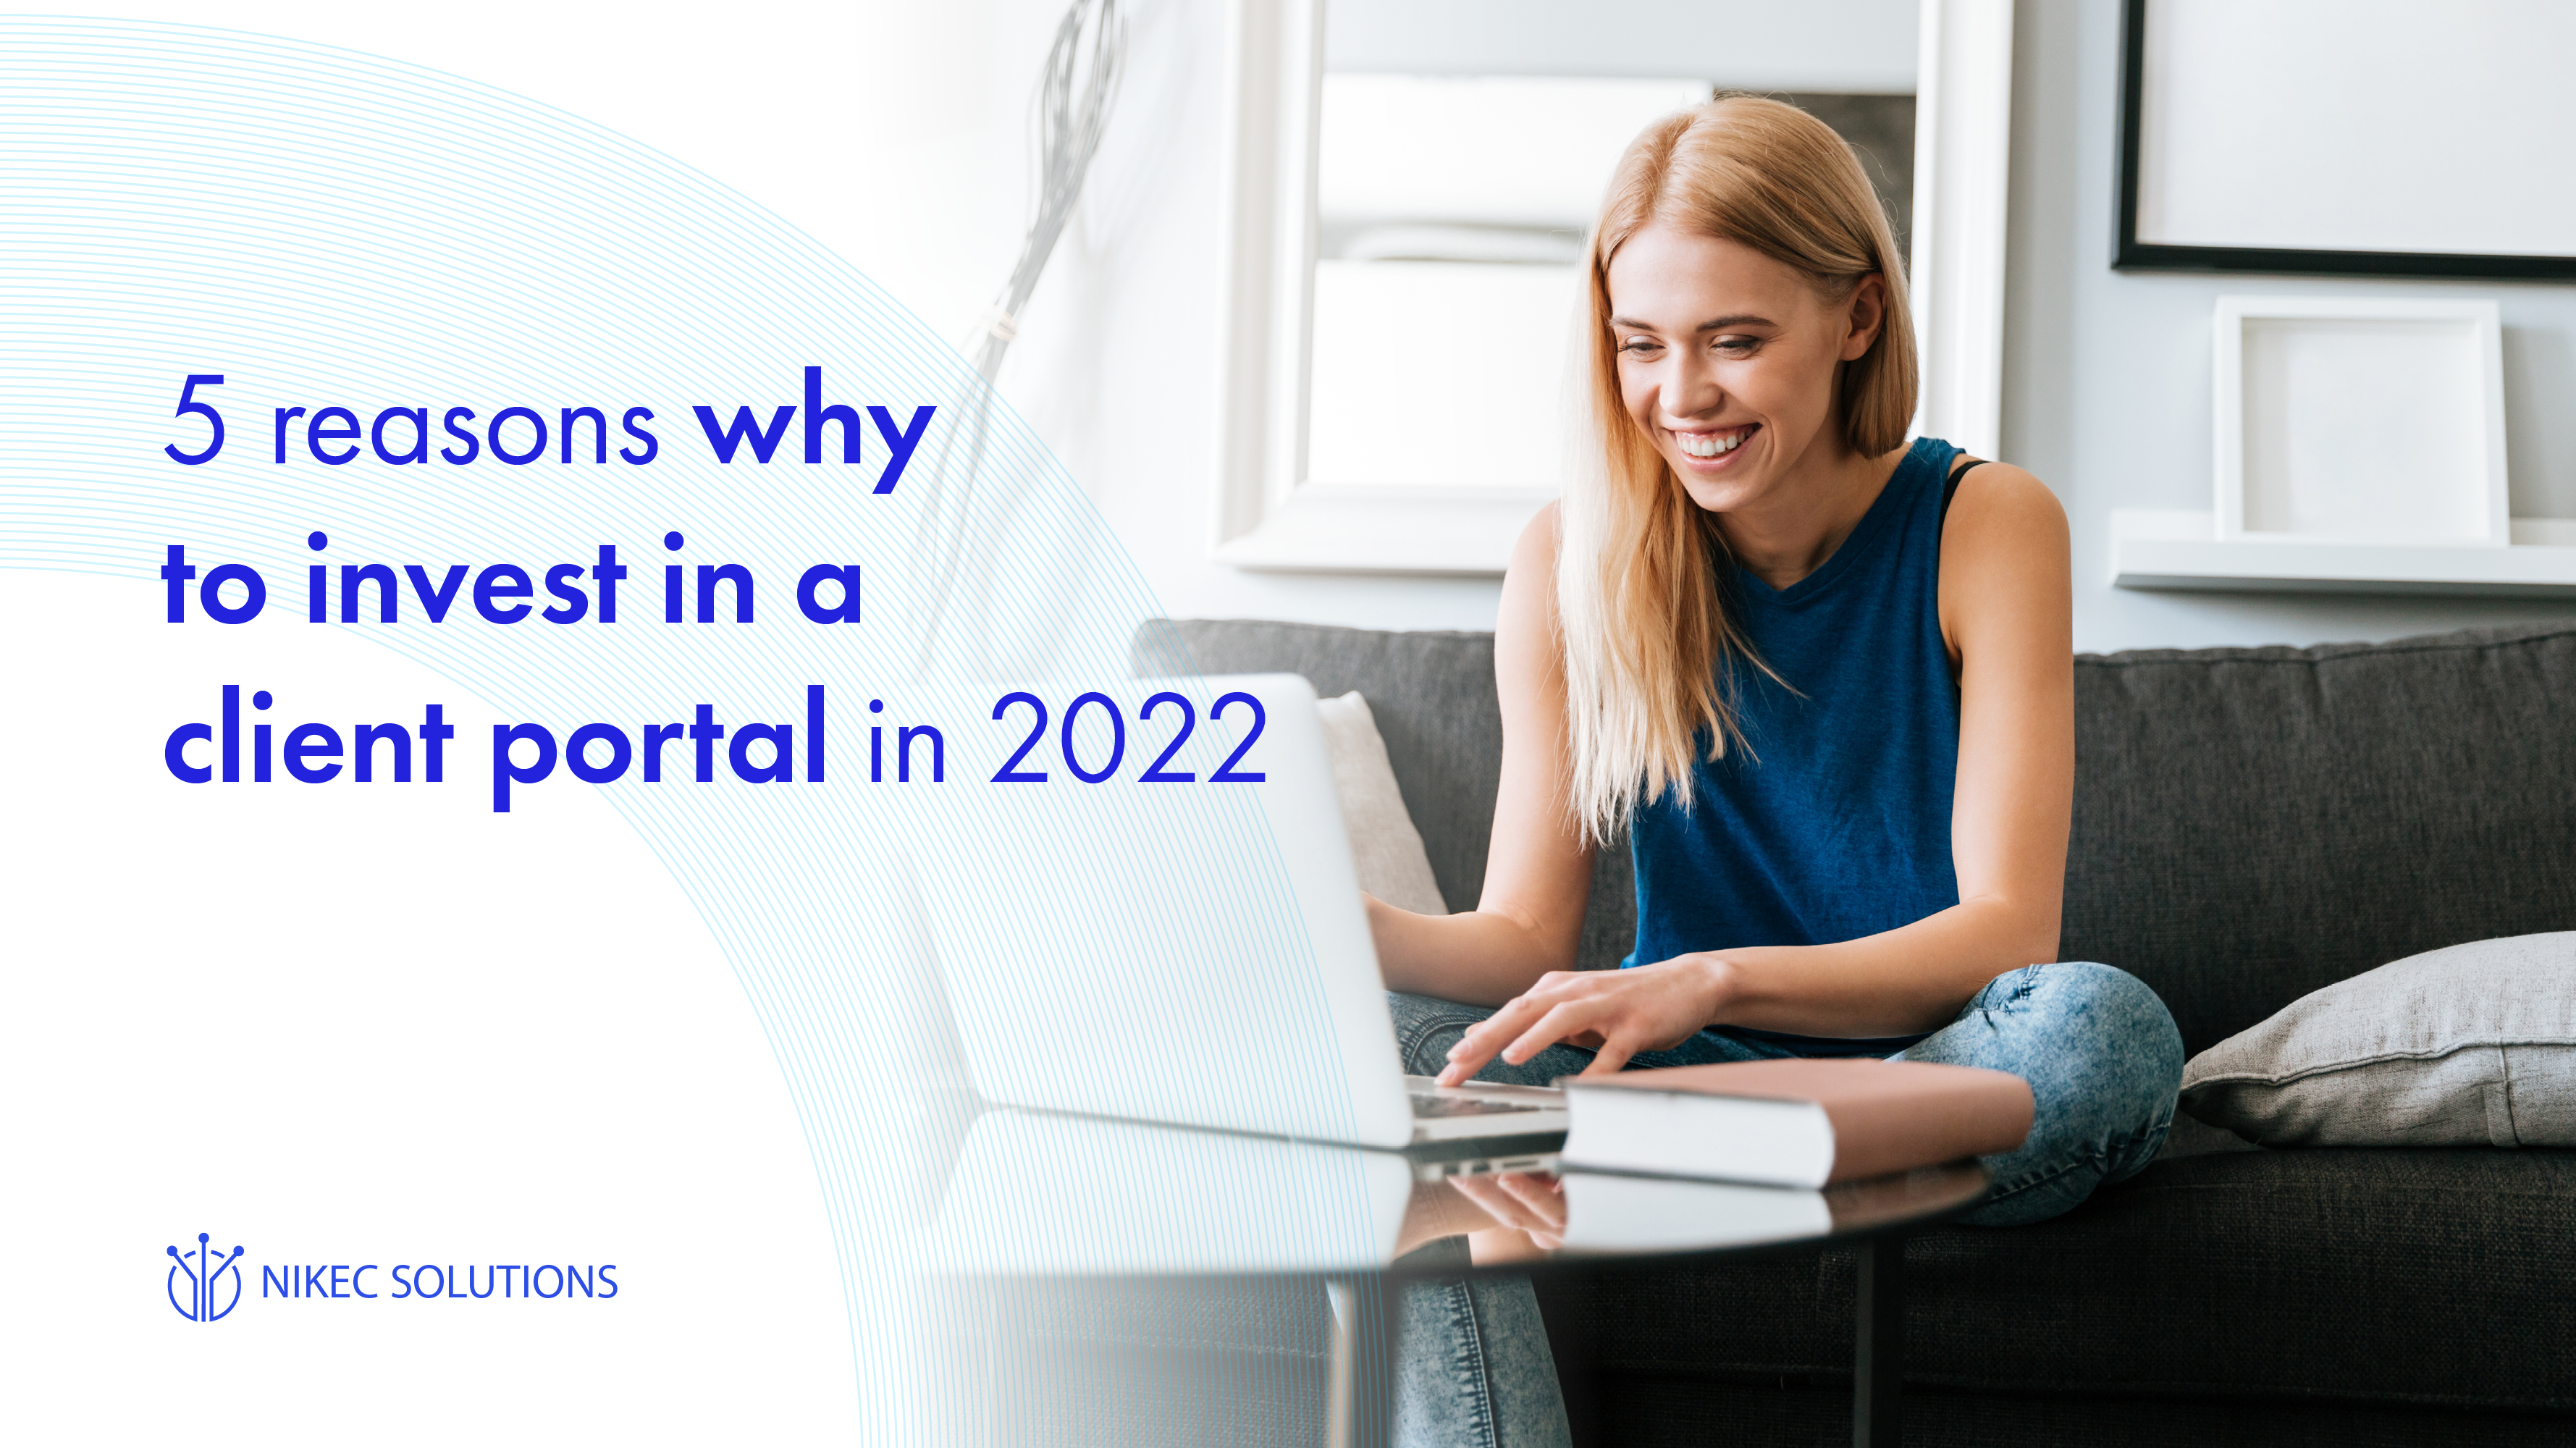 5 reasons why to invest in a client portal in 2022